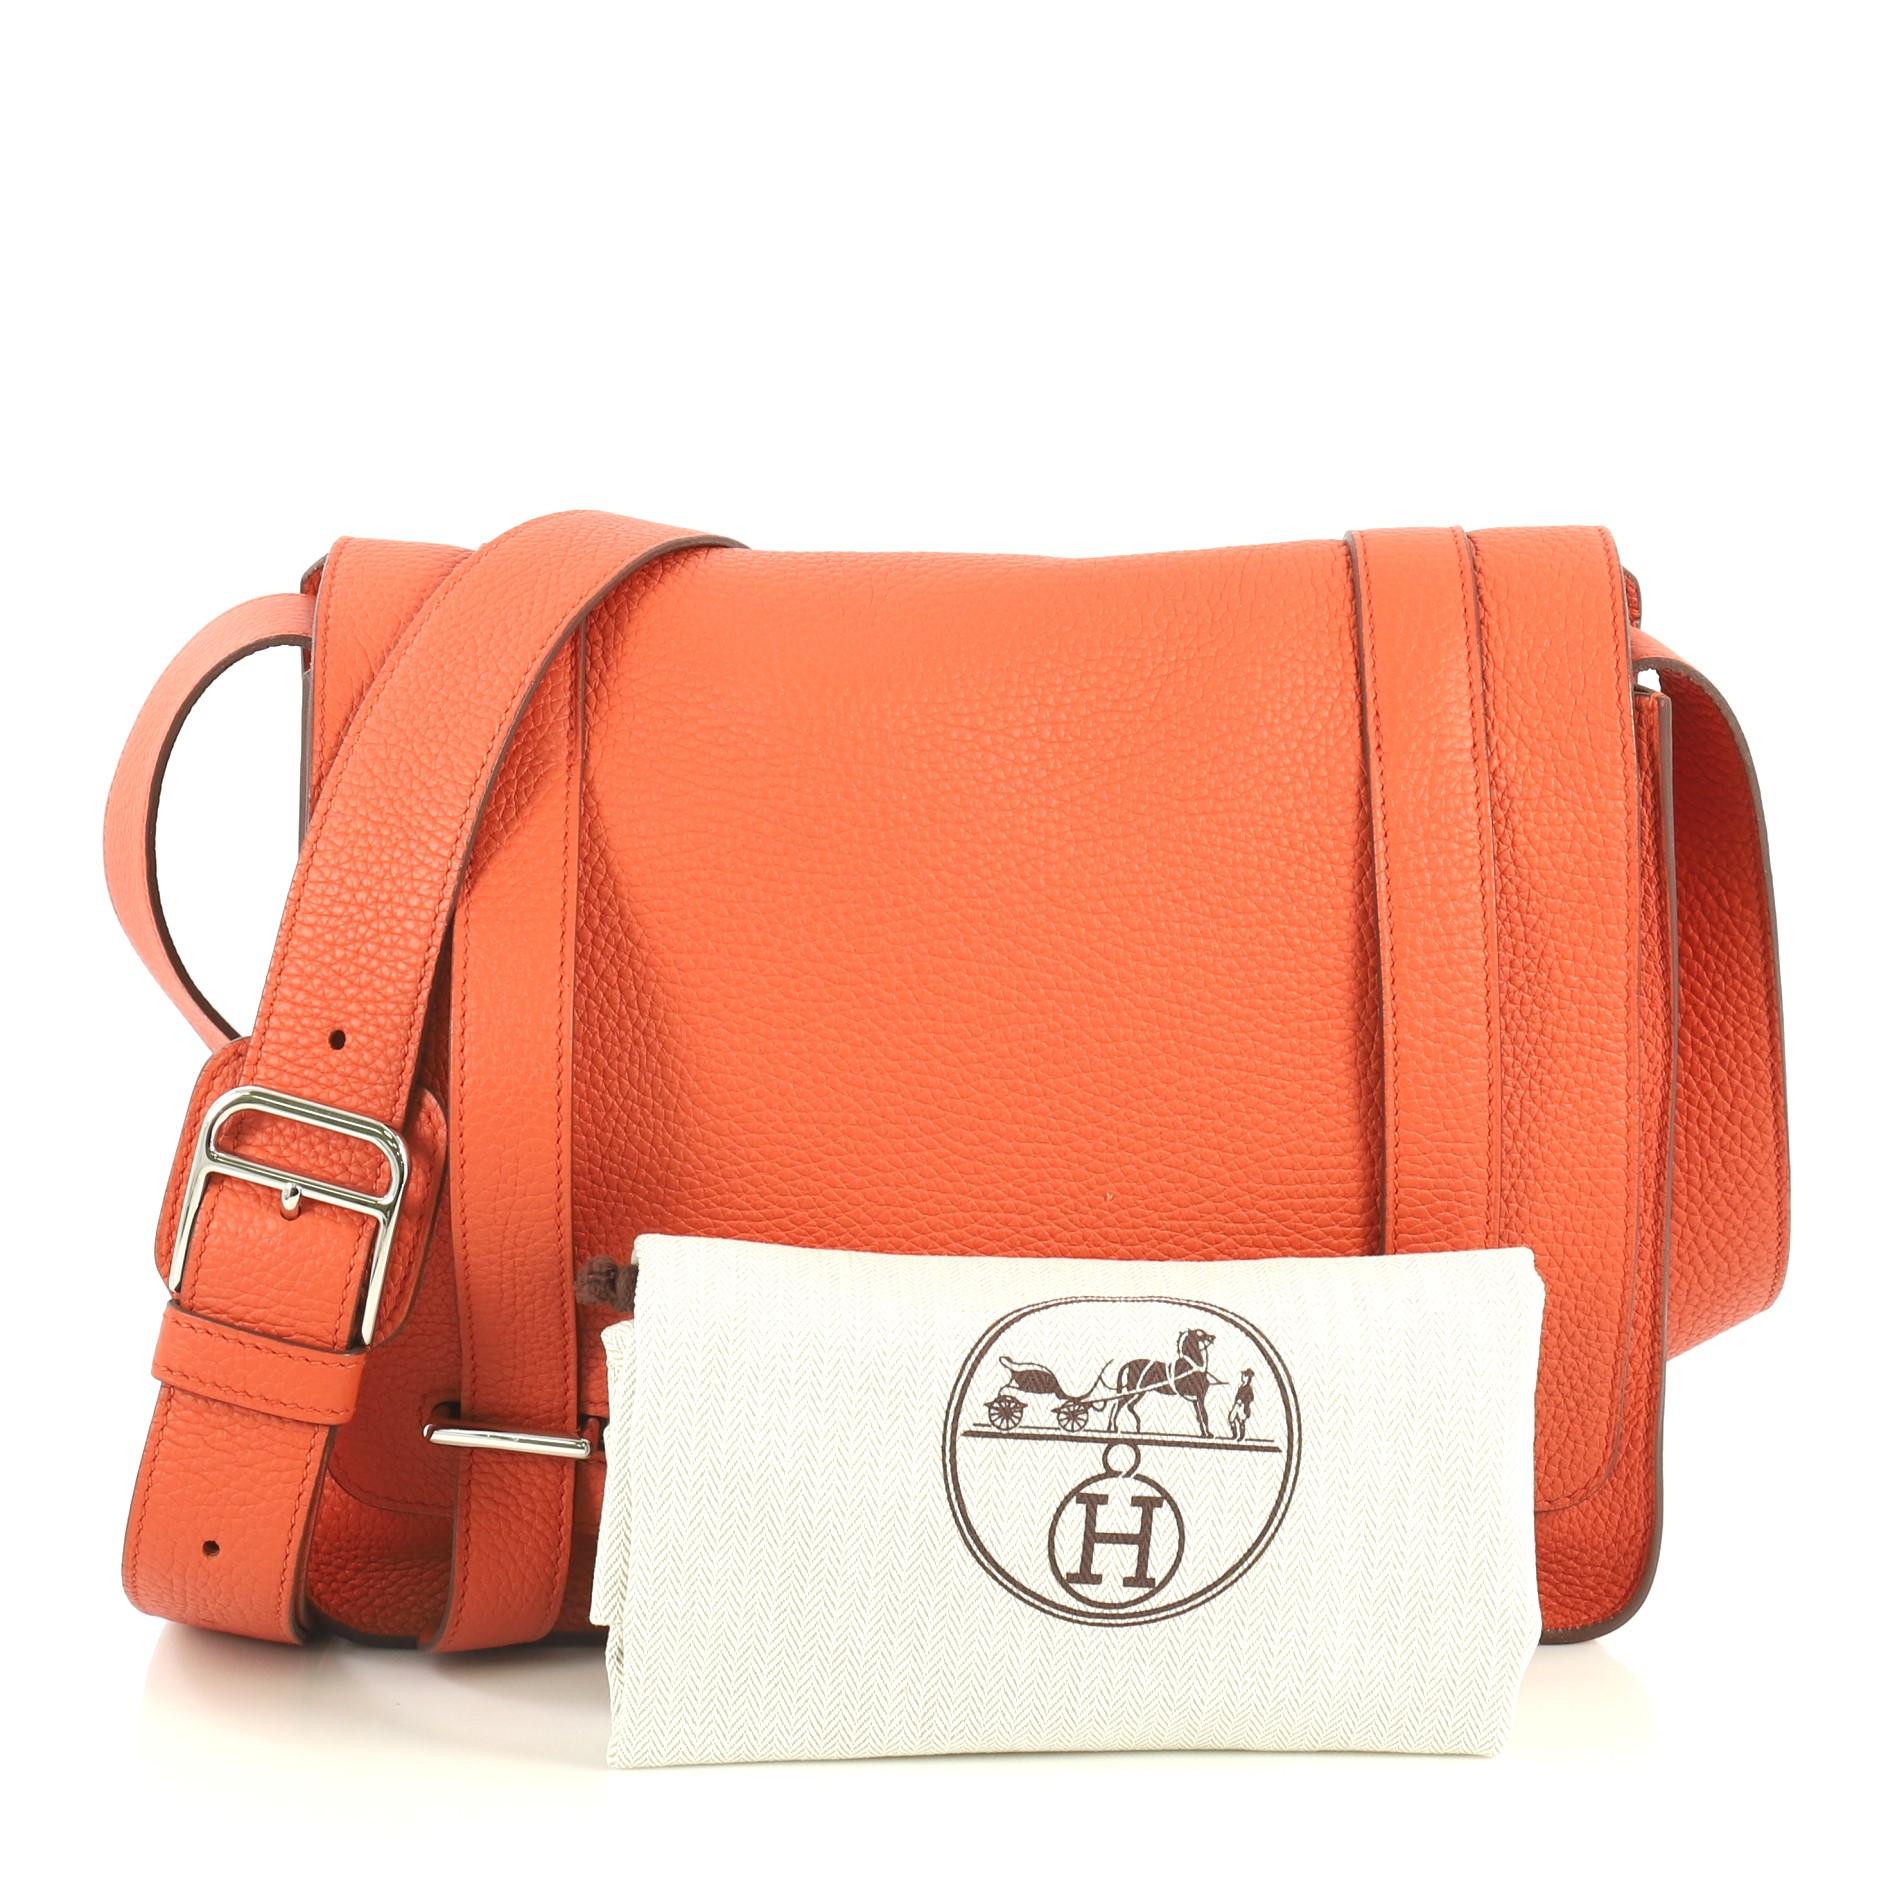 This Hermes Steve Caporal Handbag Clemence, crafted in Terre Battue orange Clemence leather, features an adjustable leather strap and palladium hardware. Its bracket closure opens to a Terre Battue orange Chevre leather interior with slip pocket.